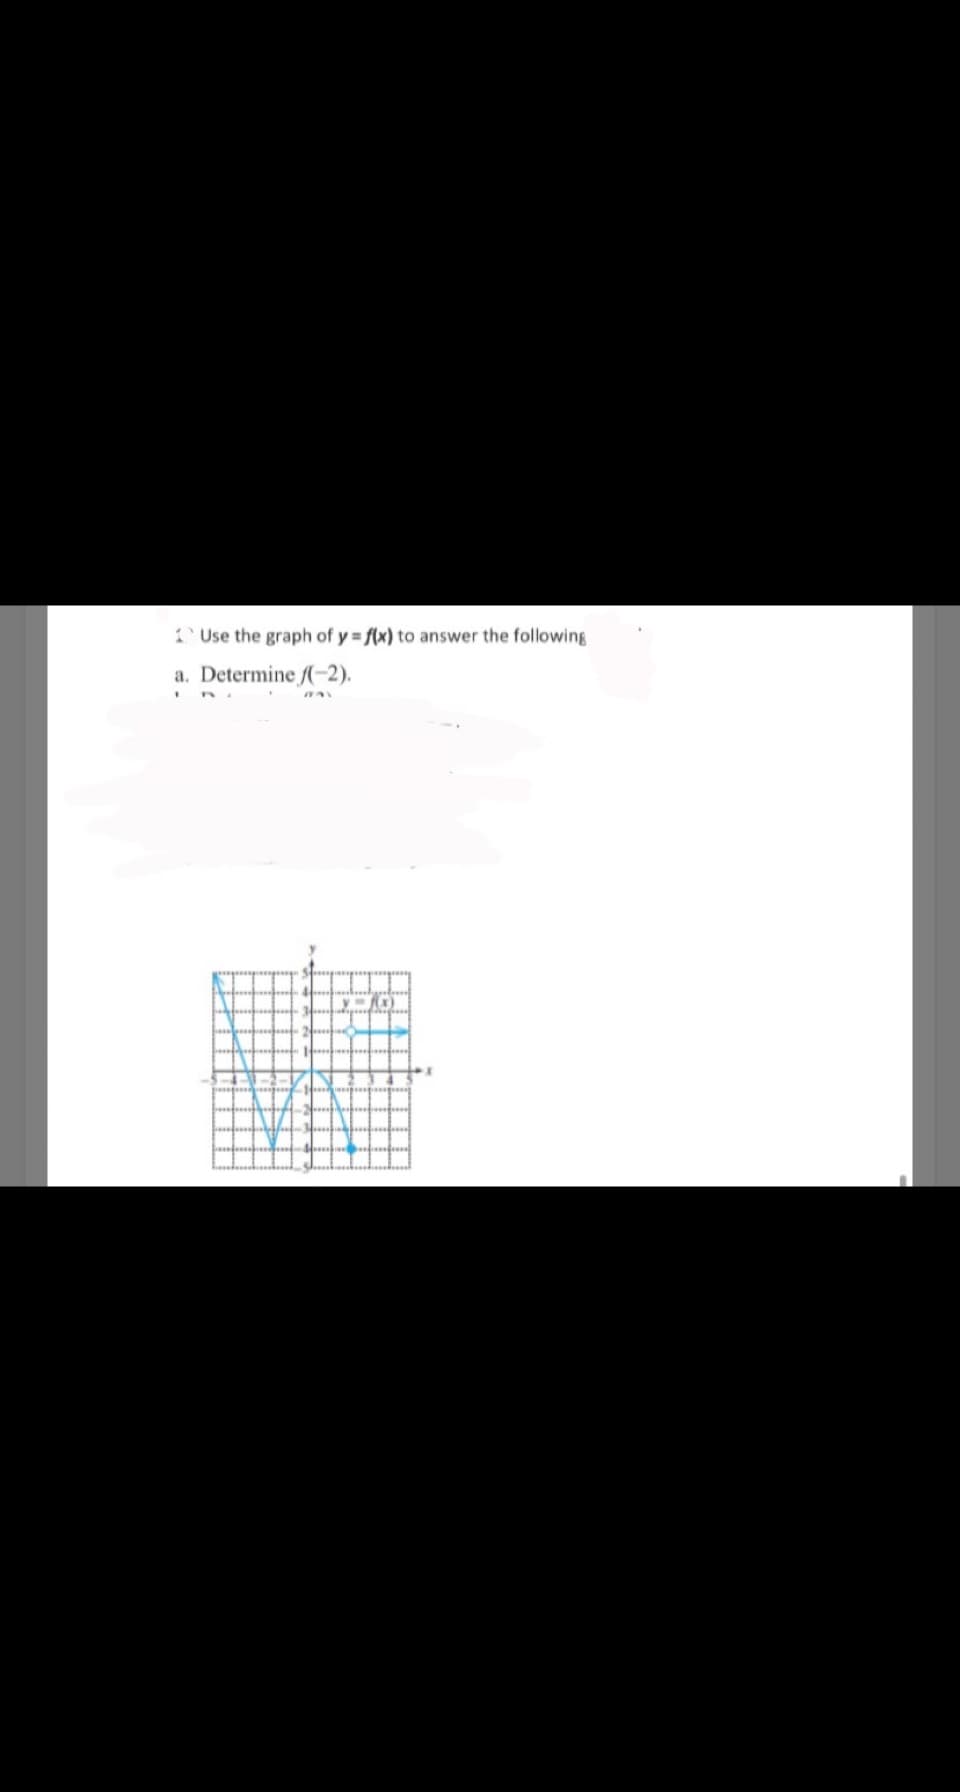 Use the graph of y f(x) to answer the following
a. Determine (-2).
